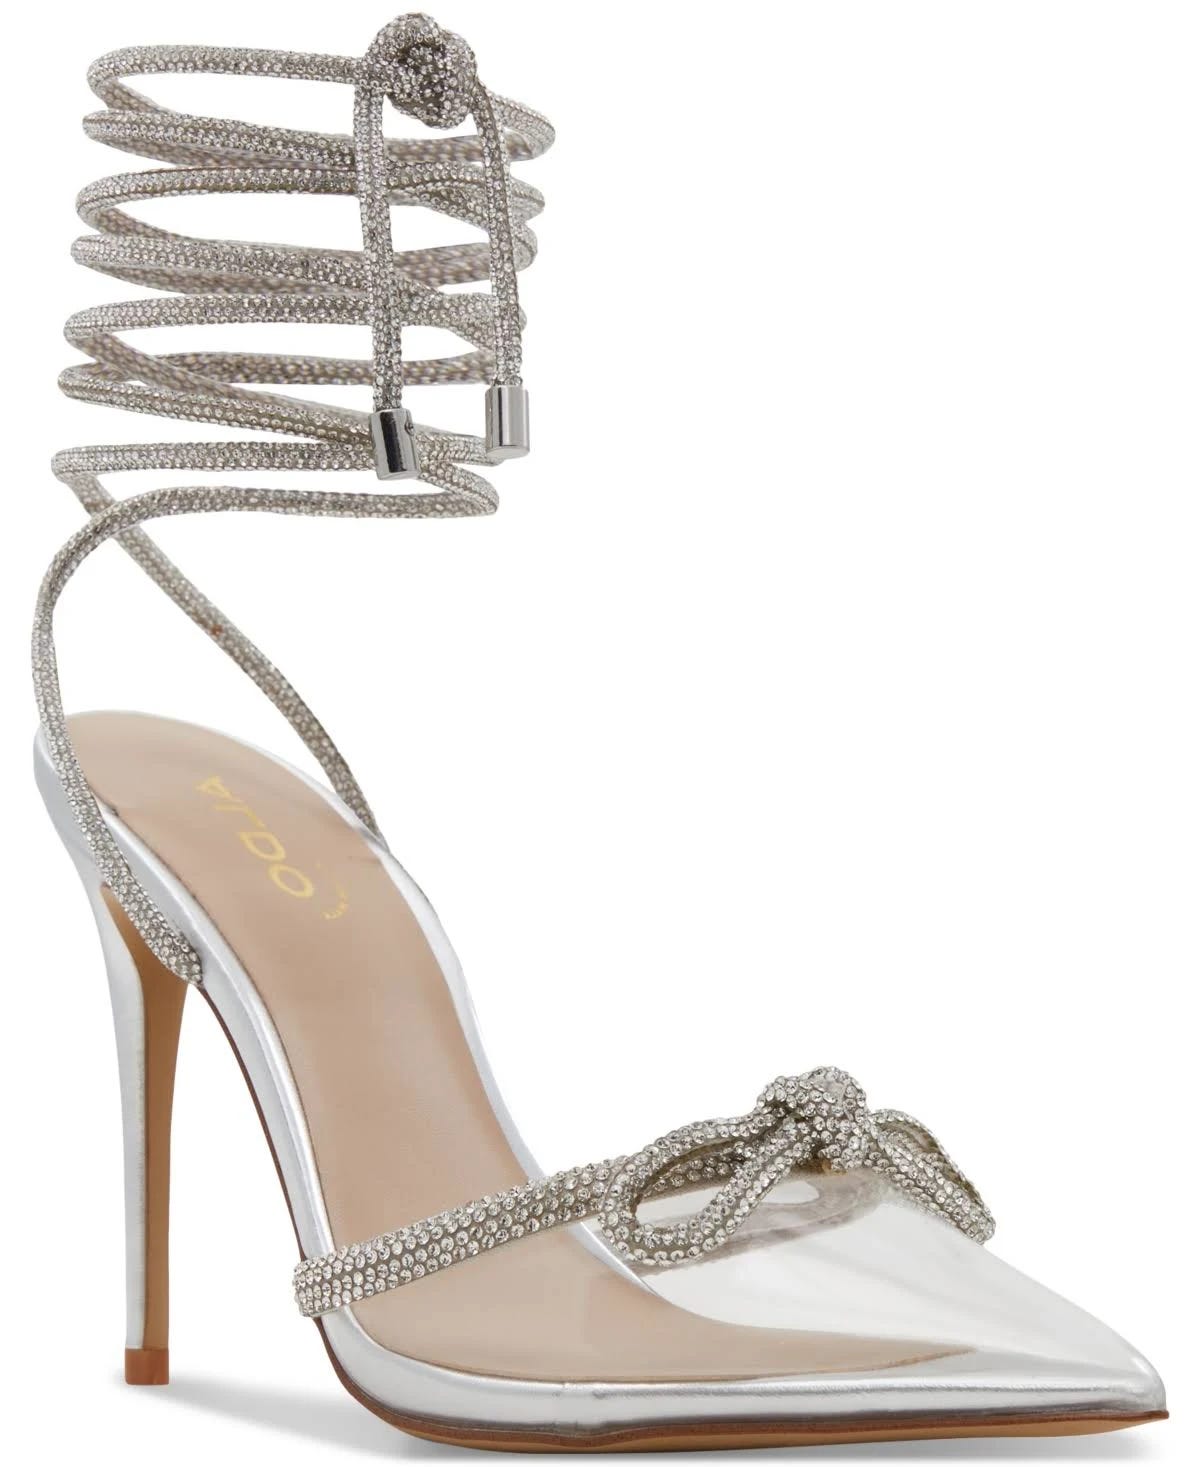 Silver Metallic Lace-Up Lace-up Pointed Toe Pump by Aldo for Women - Size 5 | Image